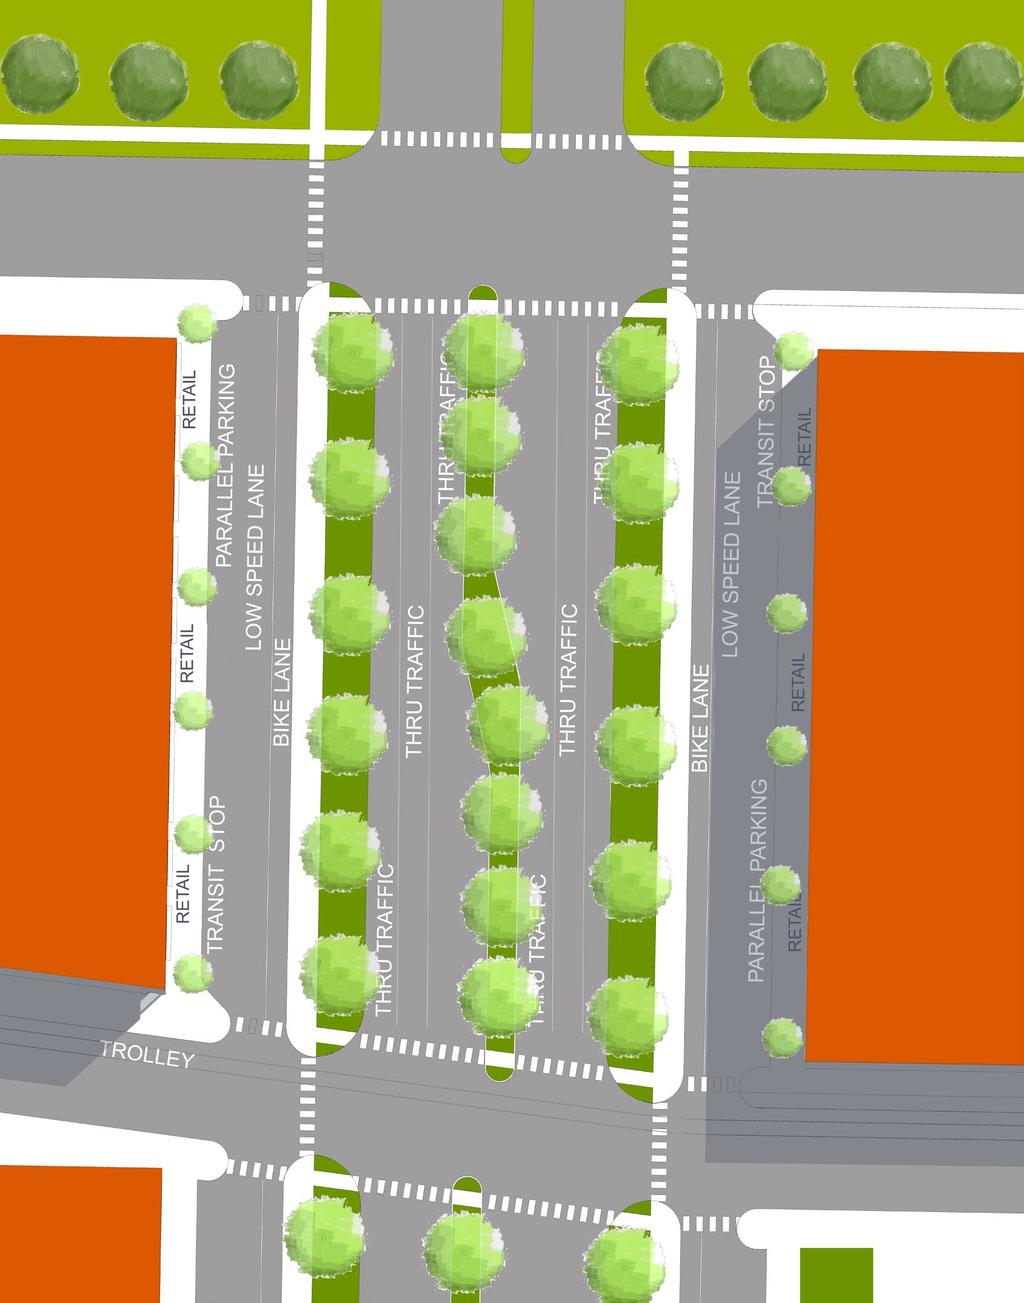 TYPICAL BOULEVARD BLOCK: Each block between lights will feature six lanes of through traffic with a left turn lane at each light.